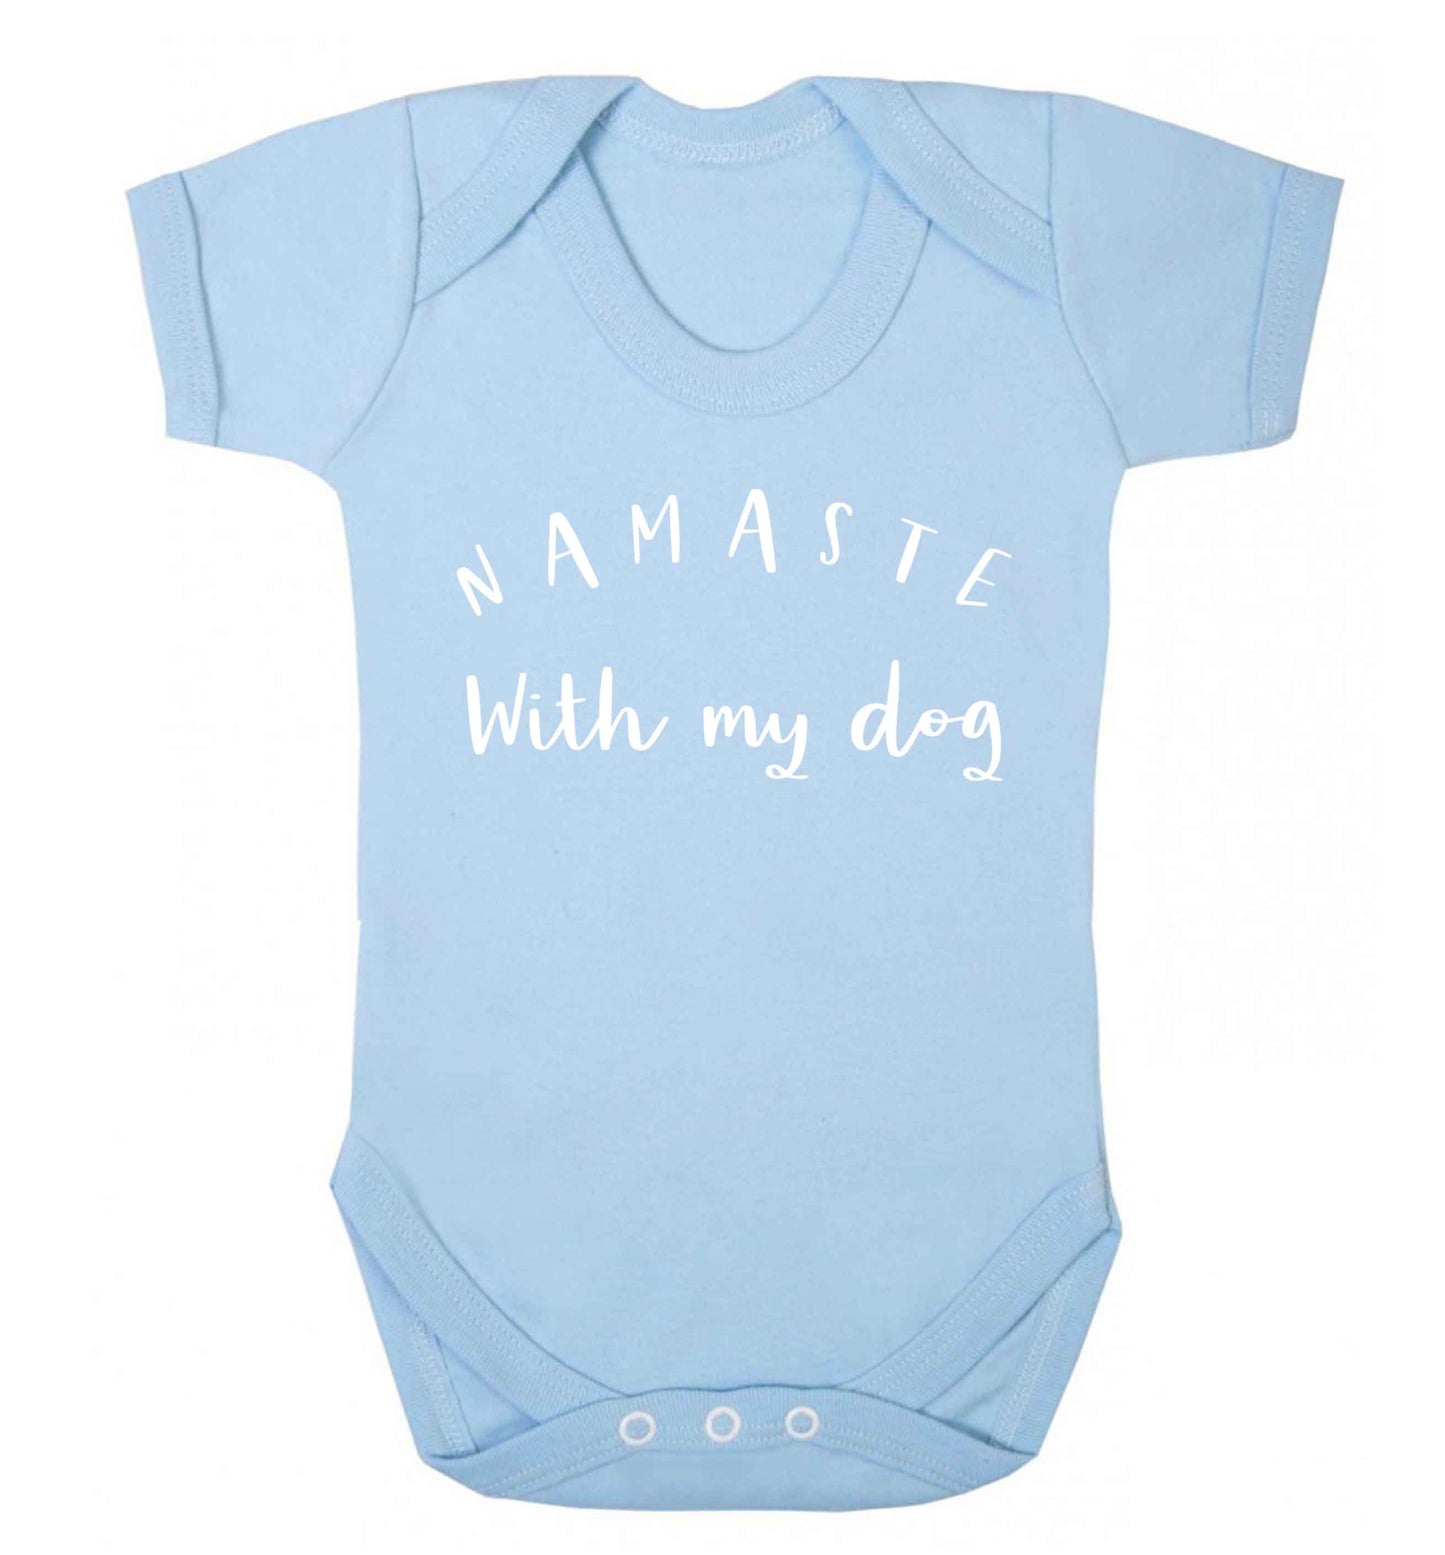 Namaste with my dog Baby Vest pale blue 18-24 months